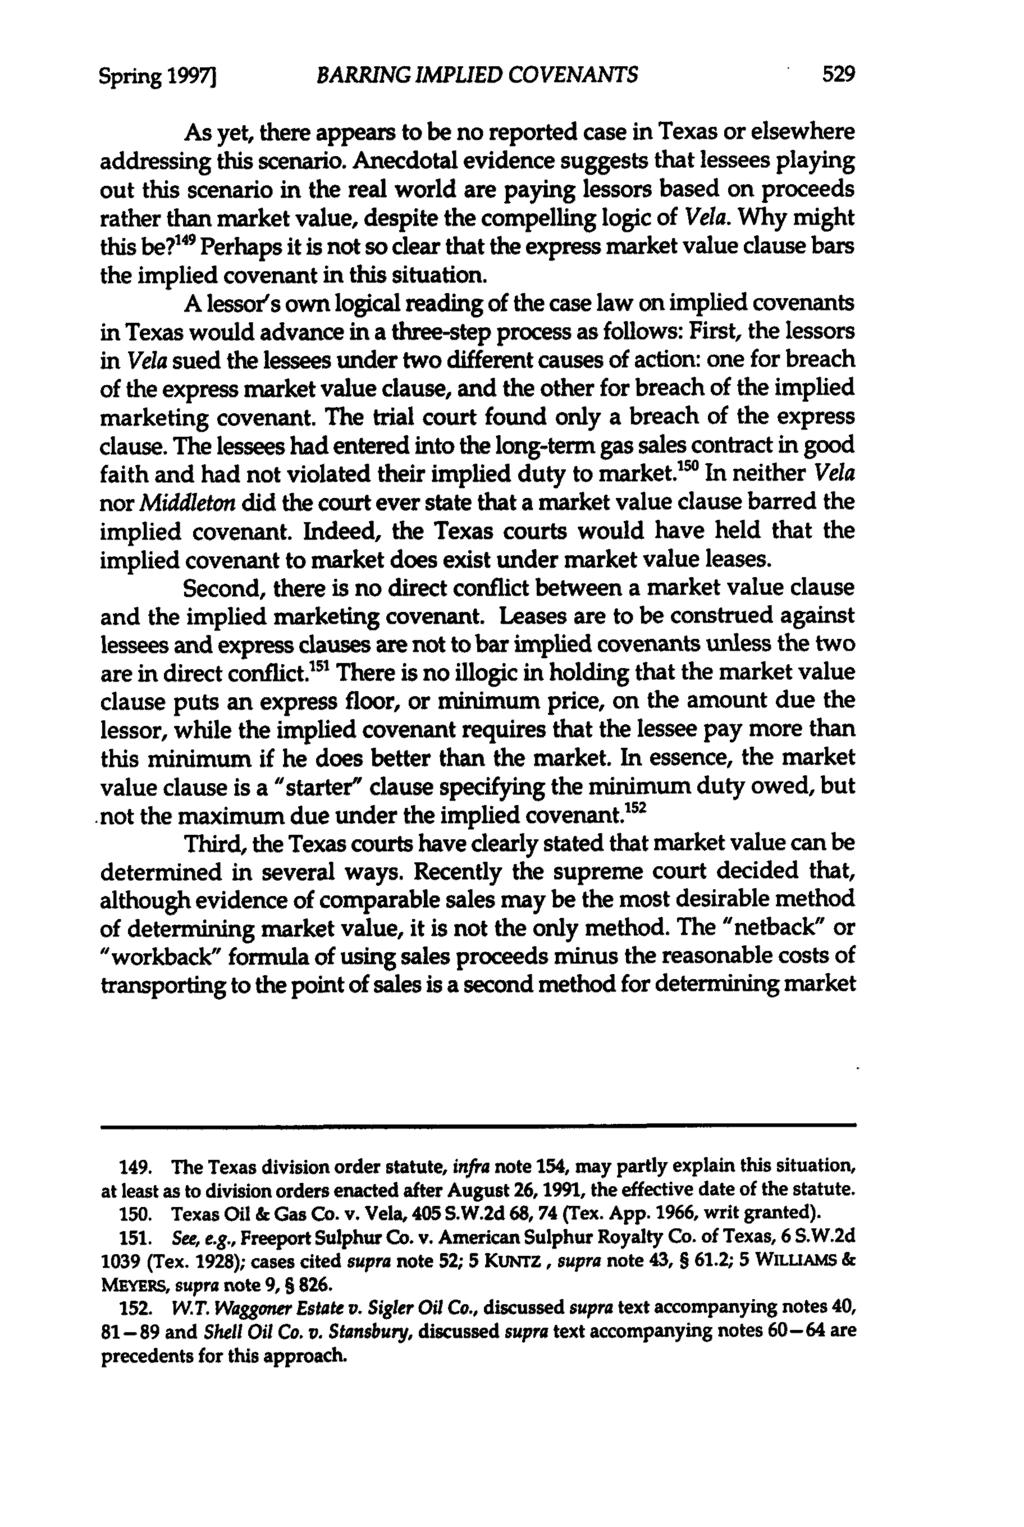 Spring 1997] BARRING IMPUED COVENANTS As yet, there appears to be no reported case in Texas or elsewhere addressing this scenario.